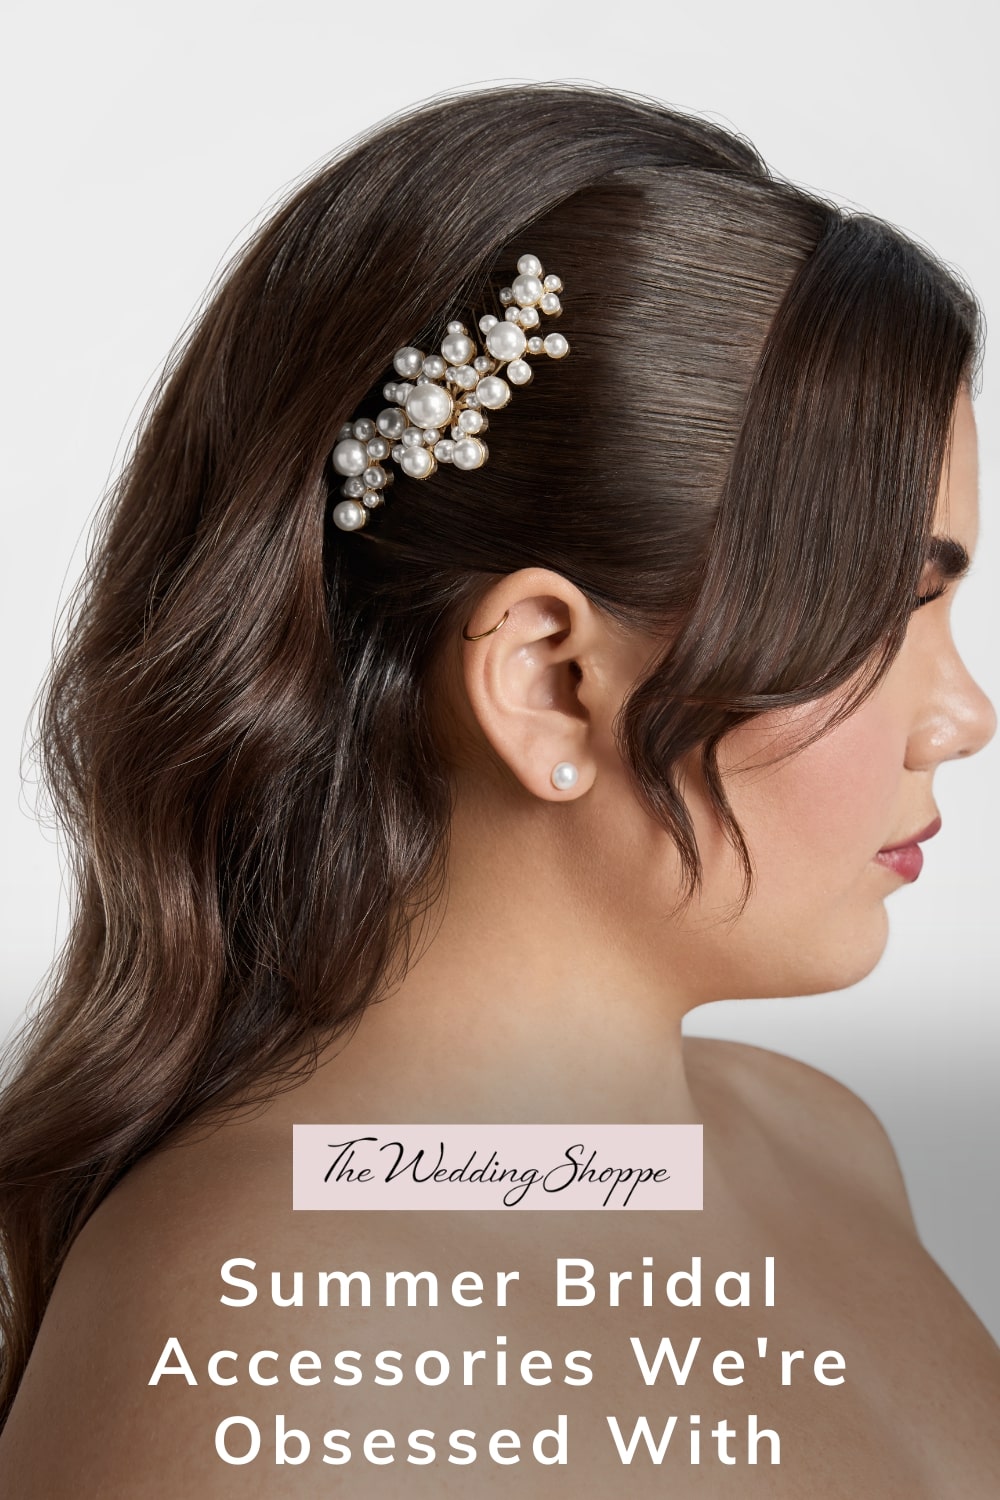 Pinnable graphic for "Summer Bridal Accessories We're Obsessed With" from the Wedding Shoppe